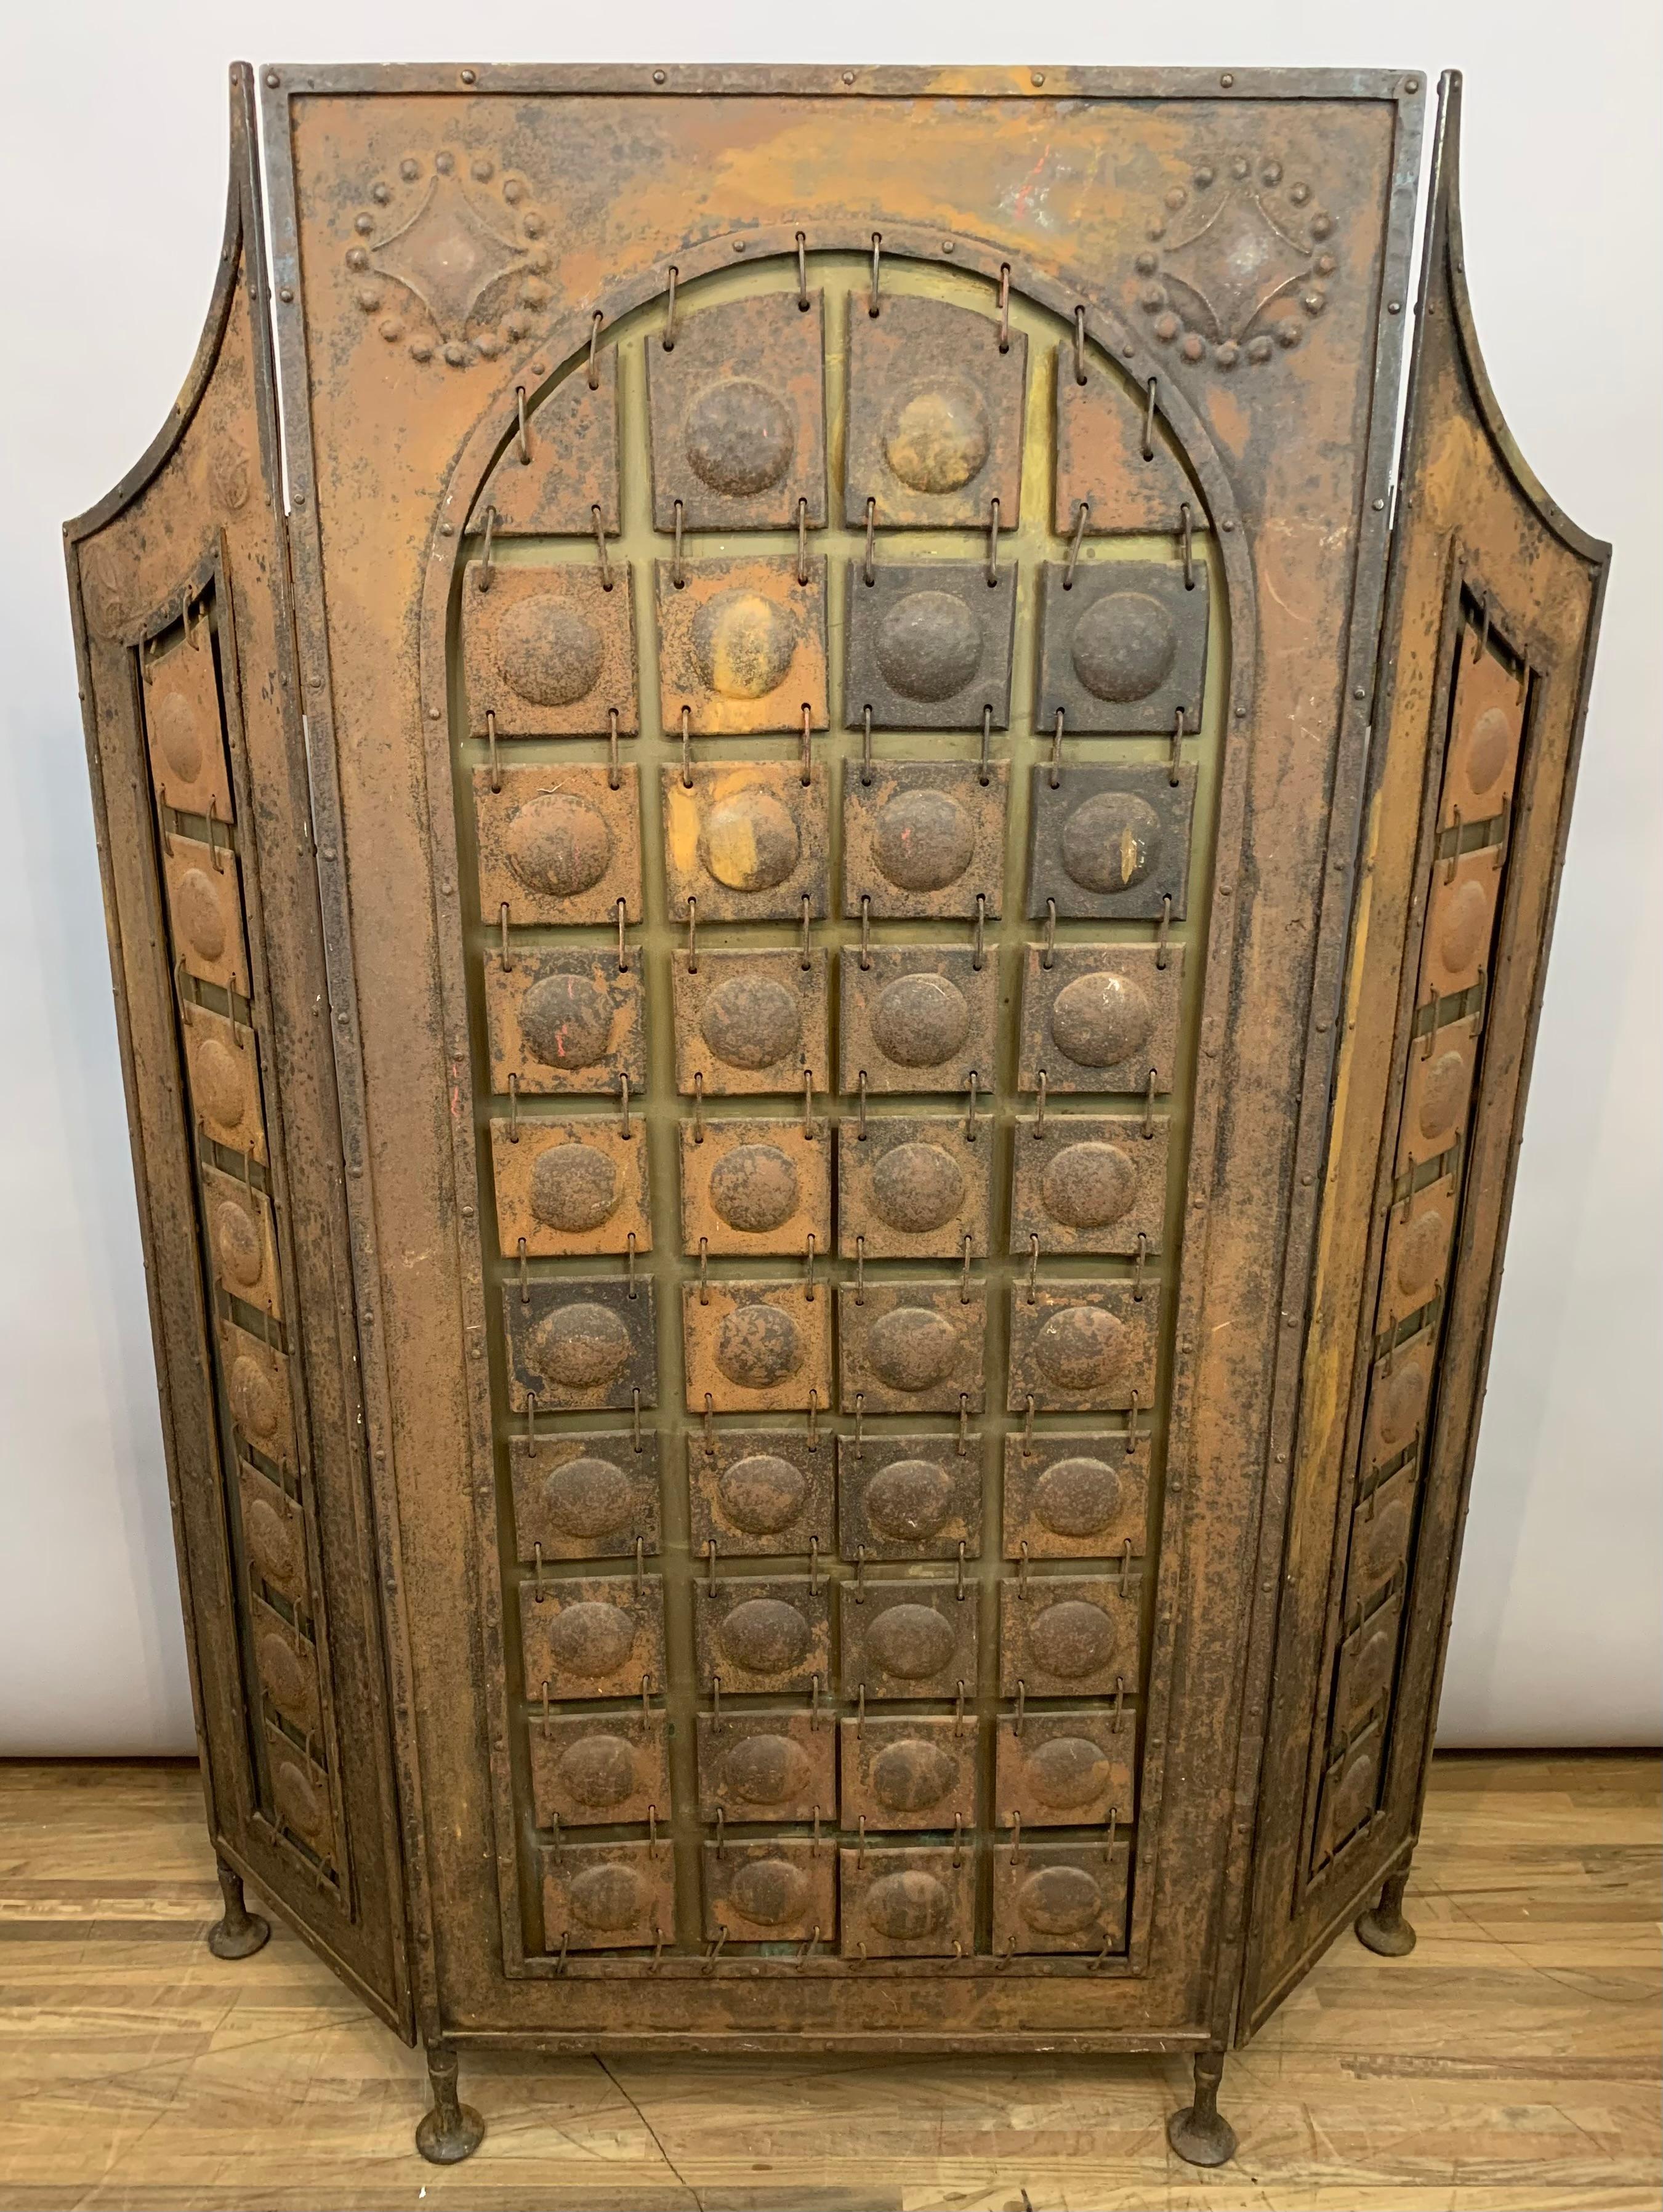 An intricately designed, and well-made, Arts & Crafts iron screen, attributed to and almost certainly designed by Richard Riemerschmid (1868-1957) in Germany. Circa 1910. The iron screen has a one large rectangular panel with two smaller stabilising